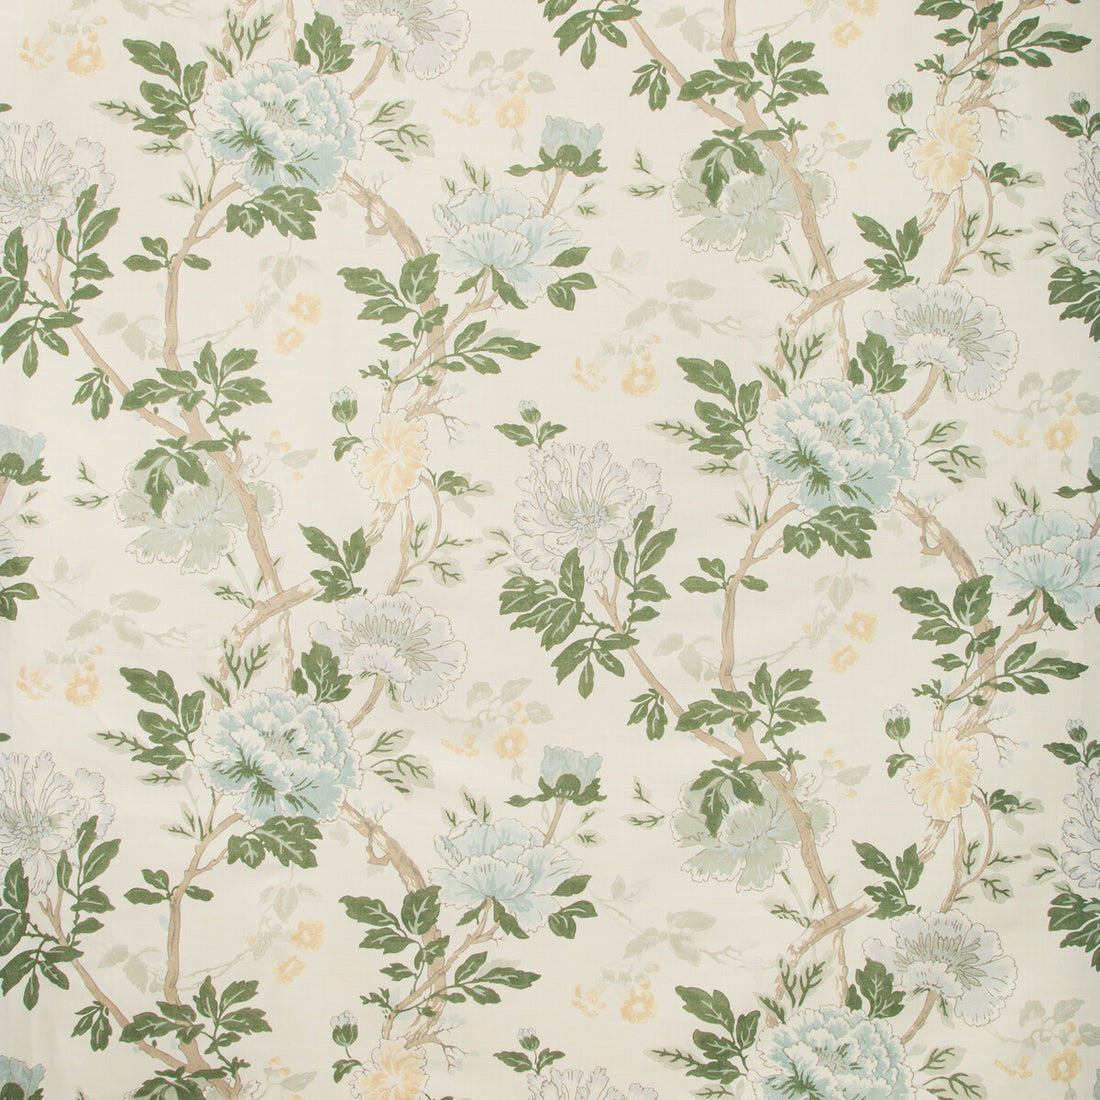 Inisfree fabric in inlet color - pattern 2019149.133.0 - by Lee Jofa in the Carrier And Company collection